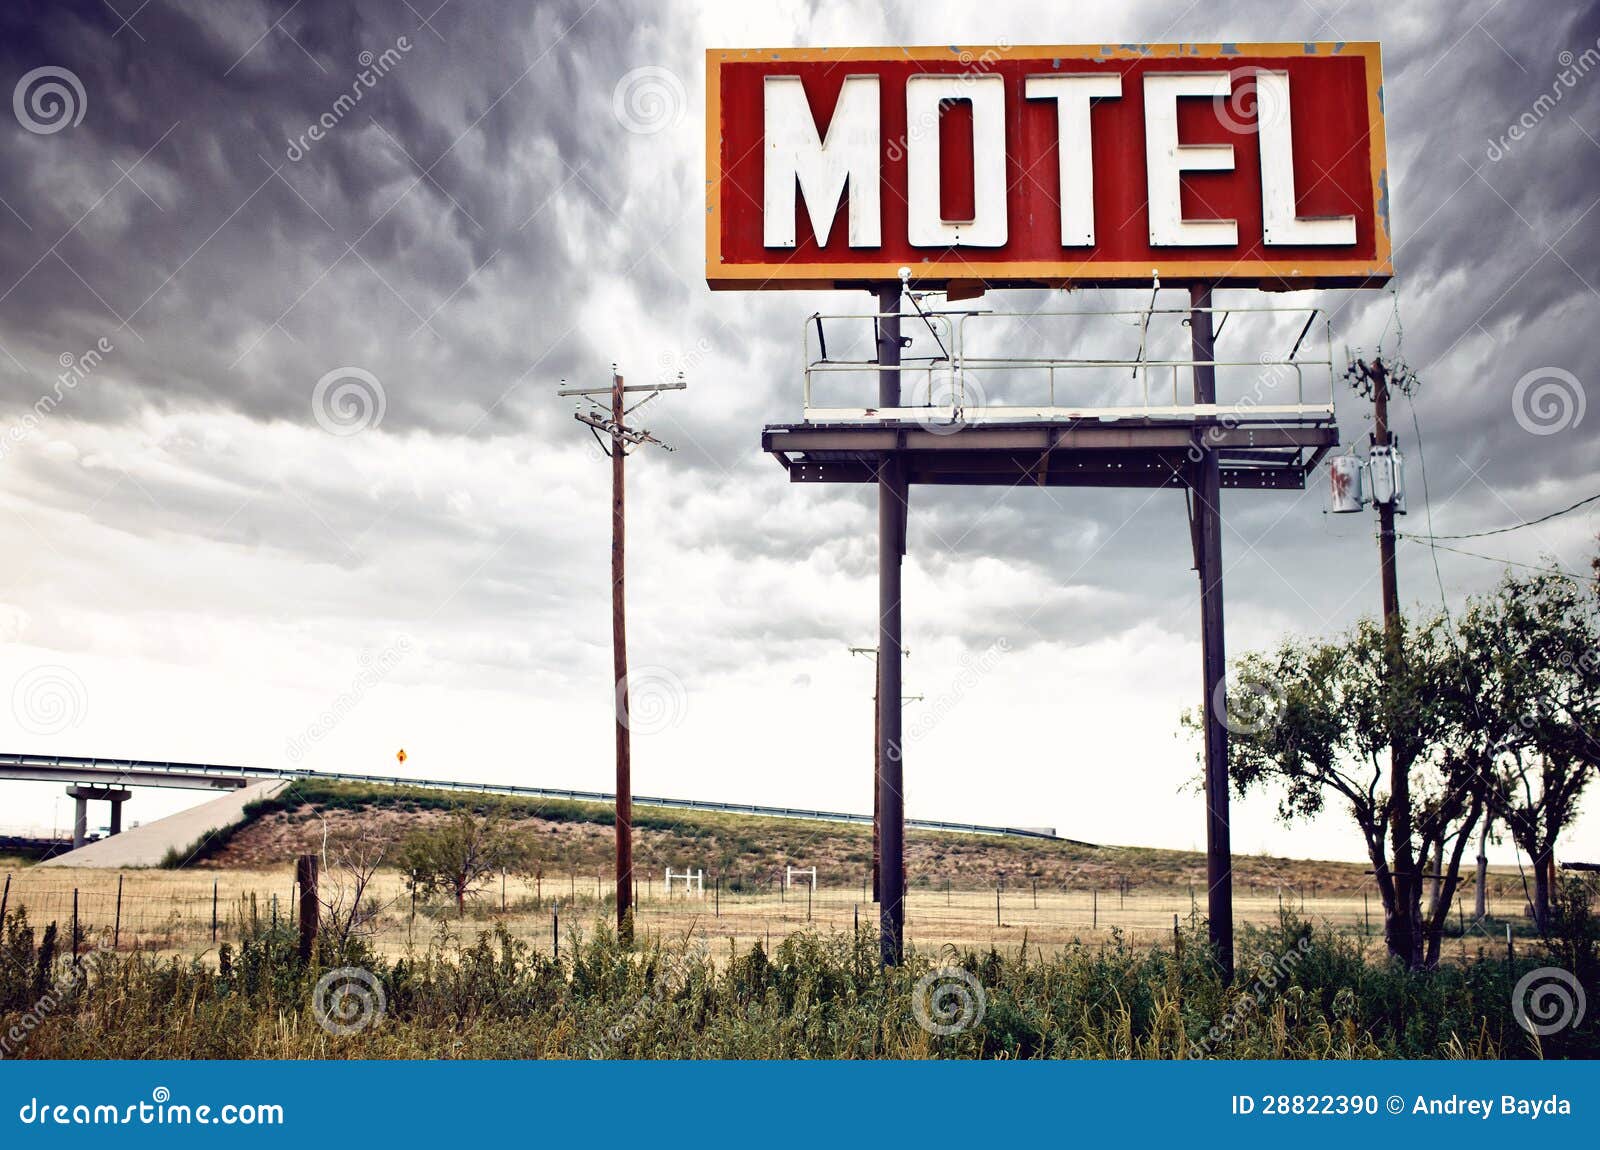 old motel sign on route 66, usa